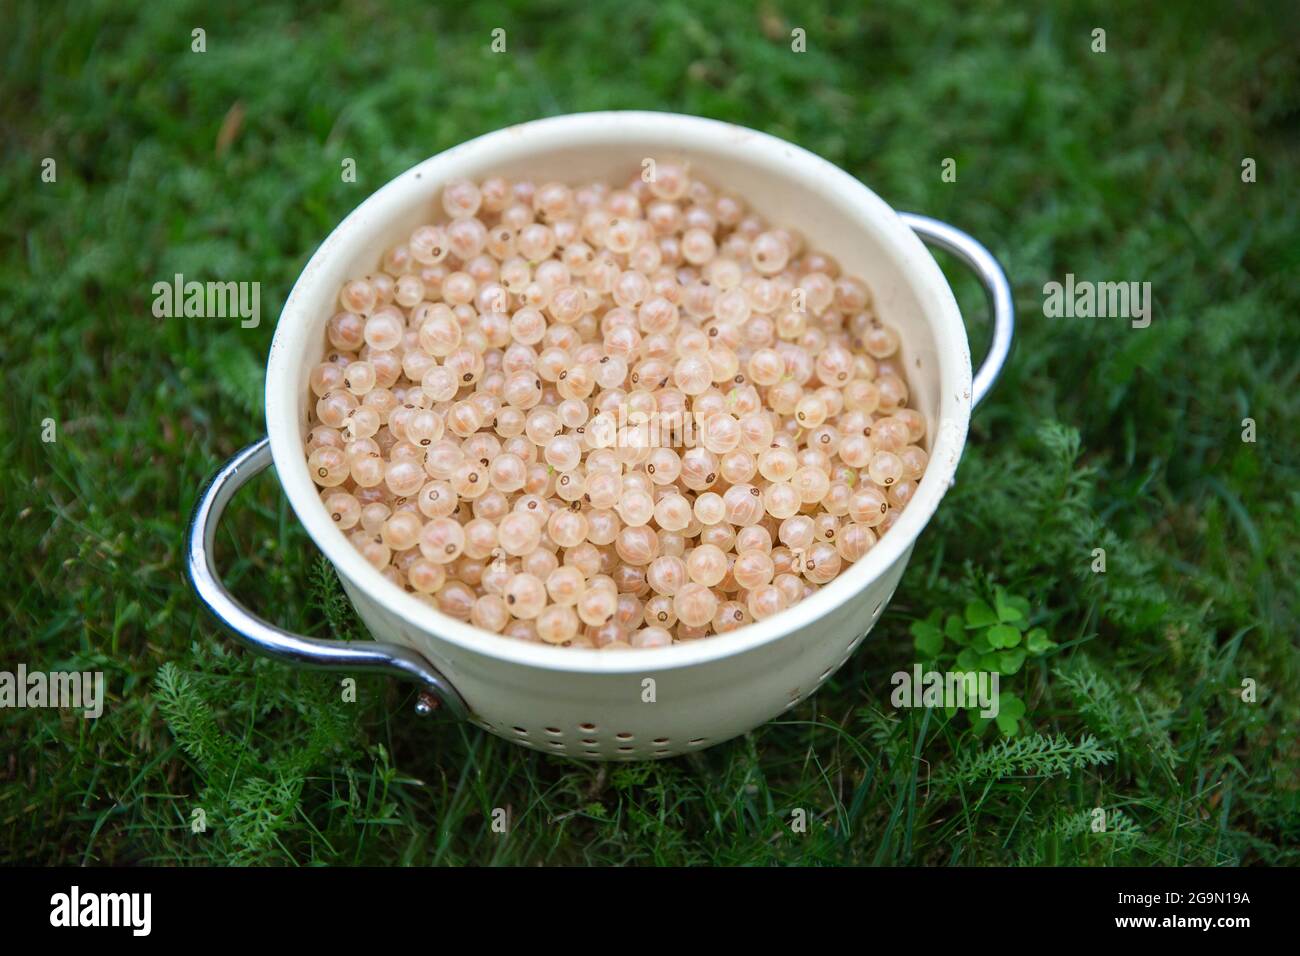 Bowl of white currants on the green grass background. Top view. Stock Photo